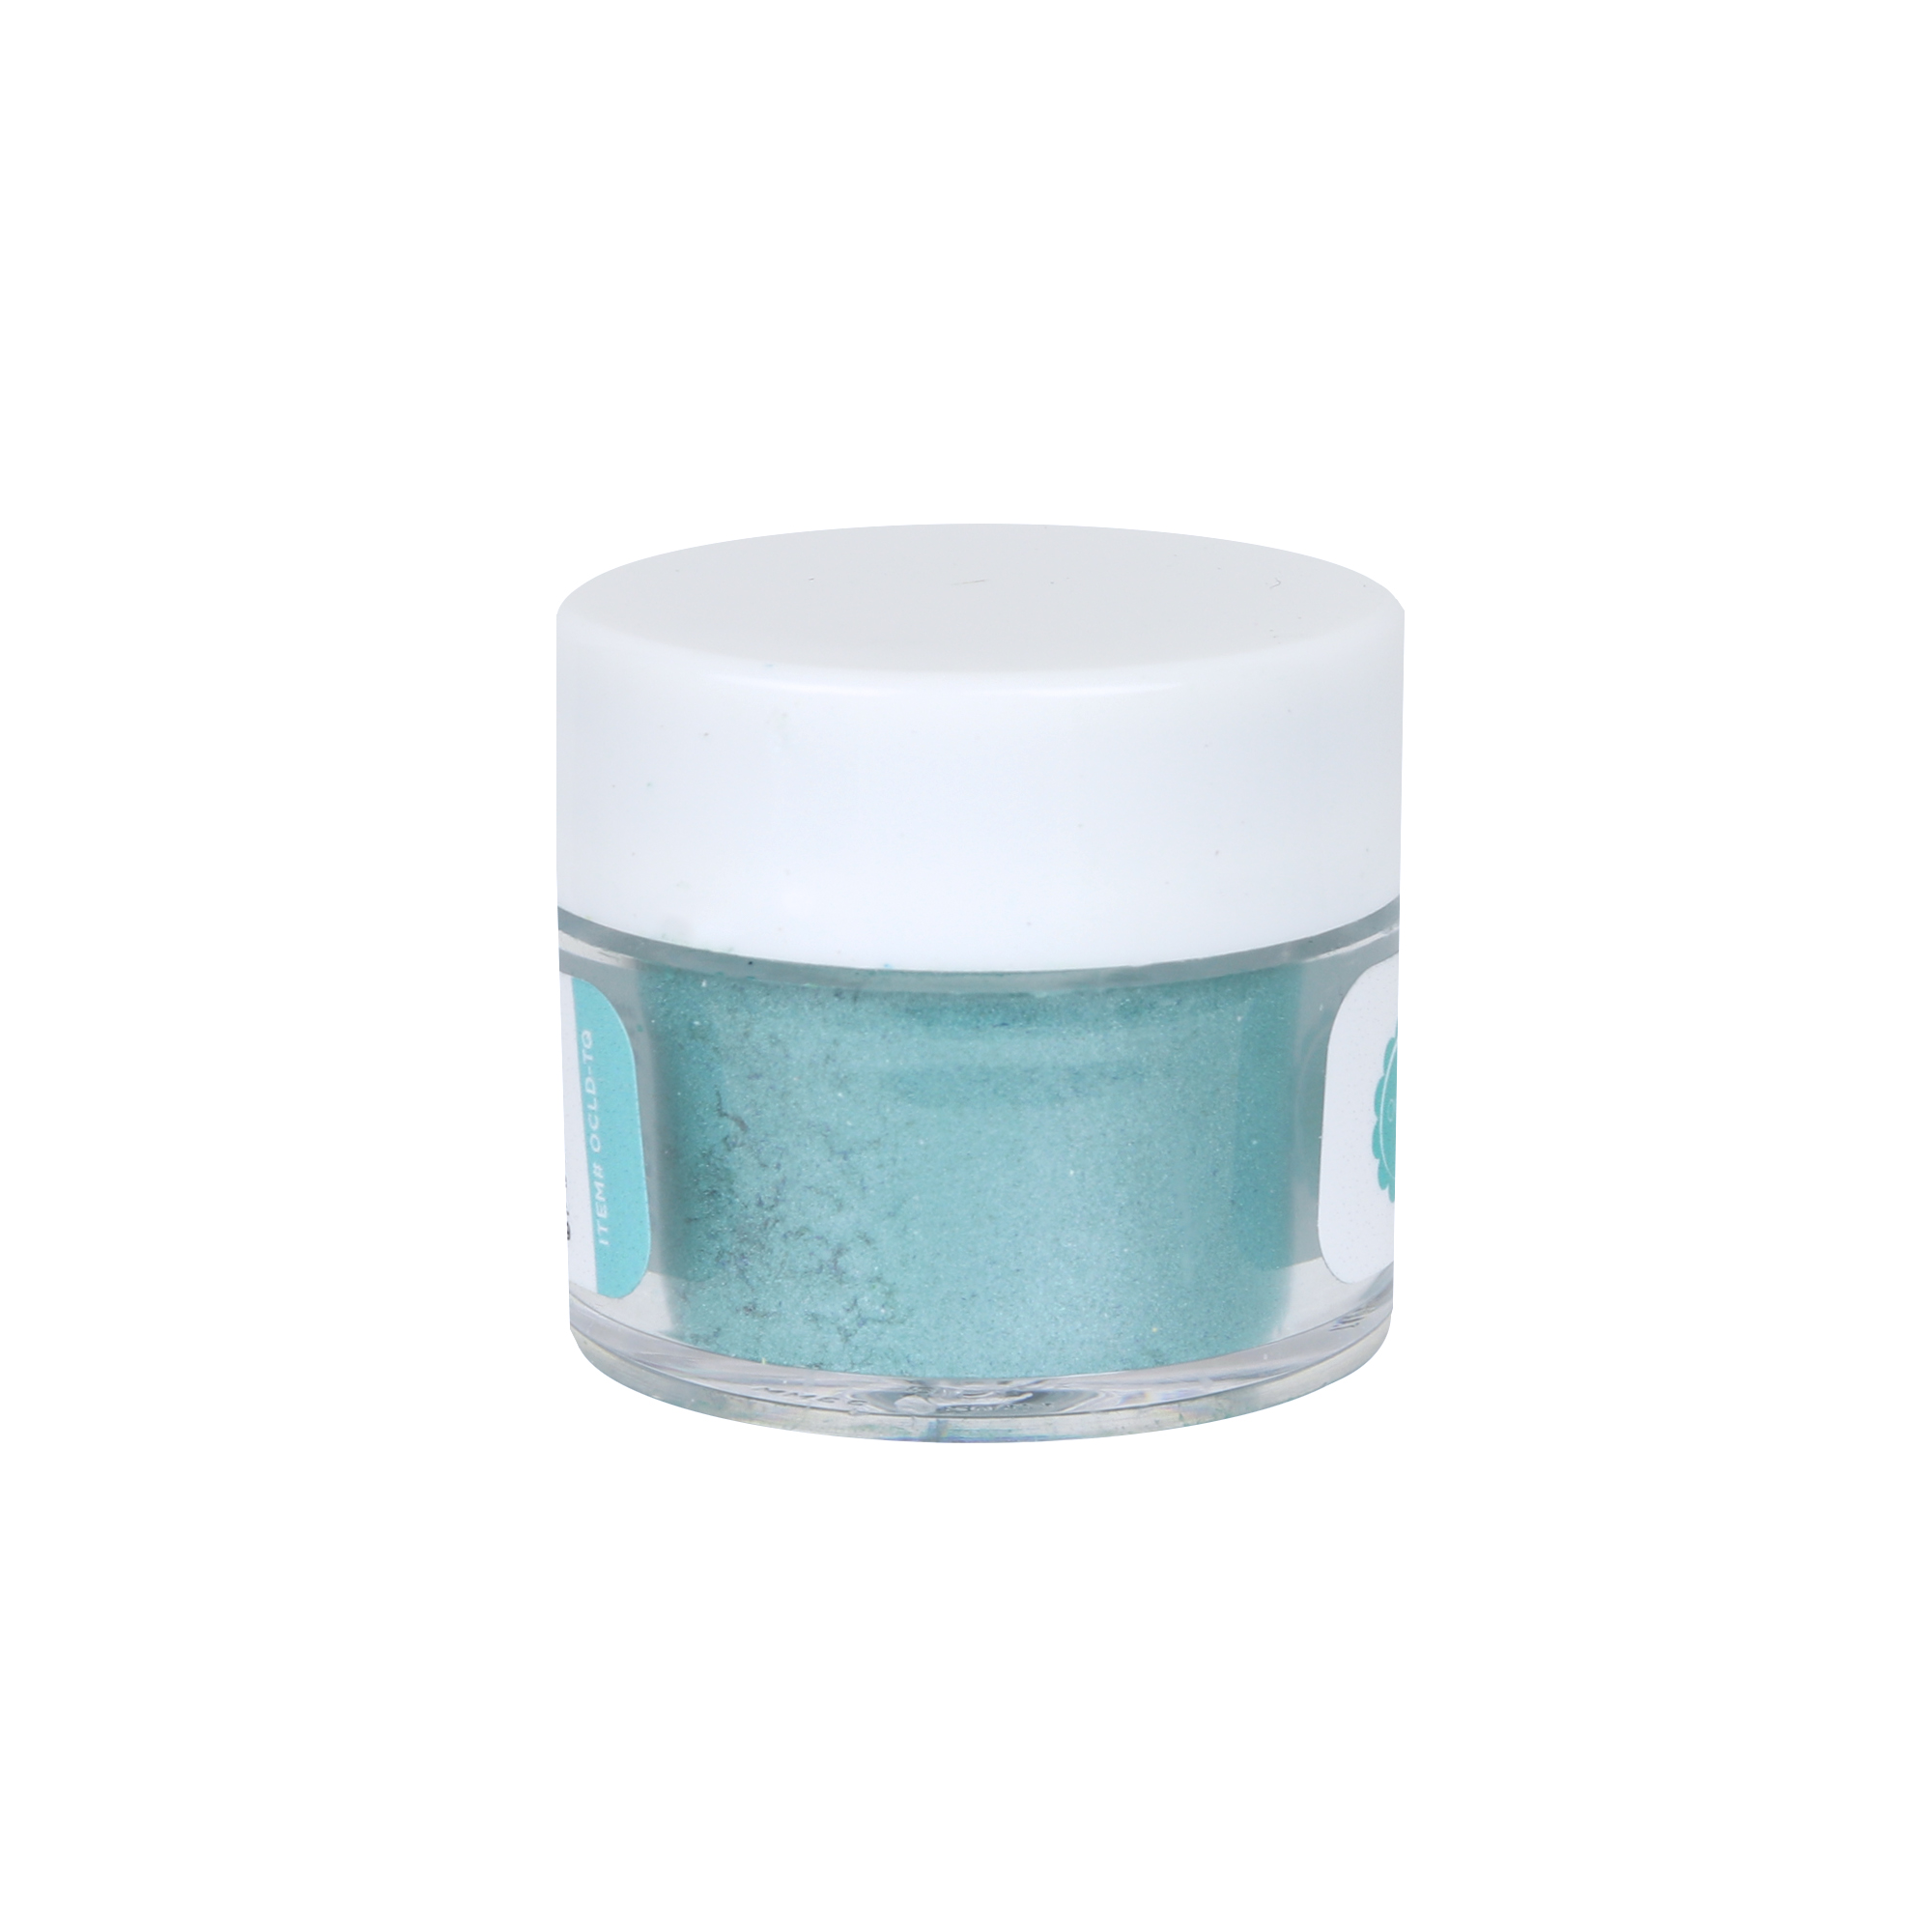 O'Creme Turquoise Luster Dust, 4 gr. image 2